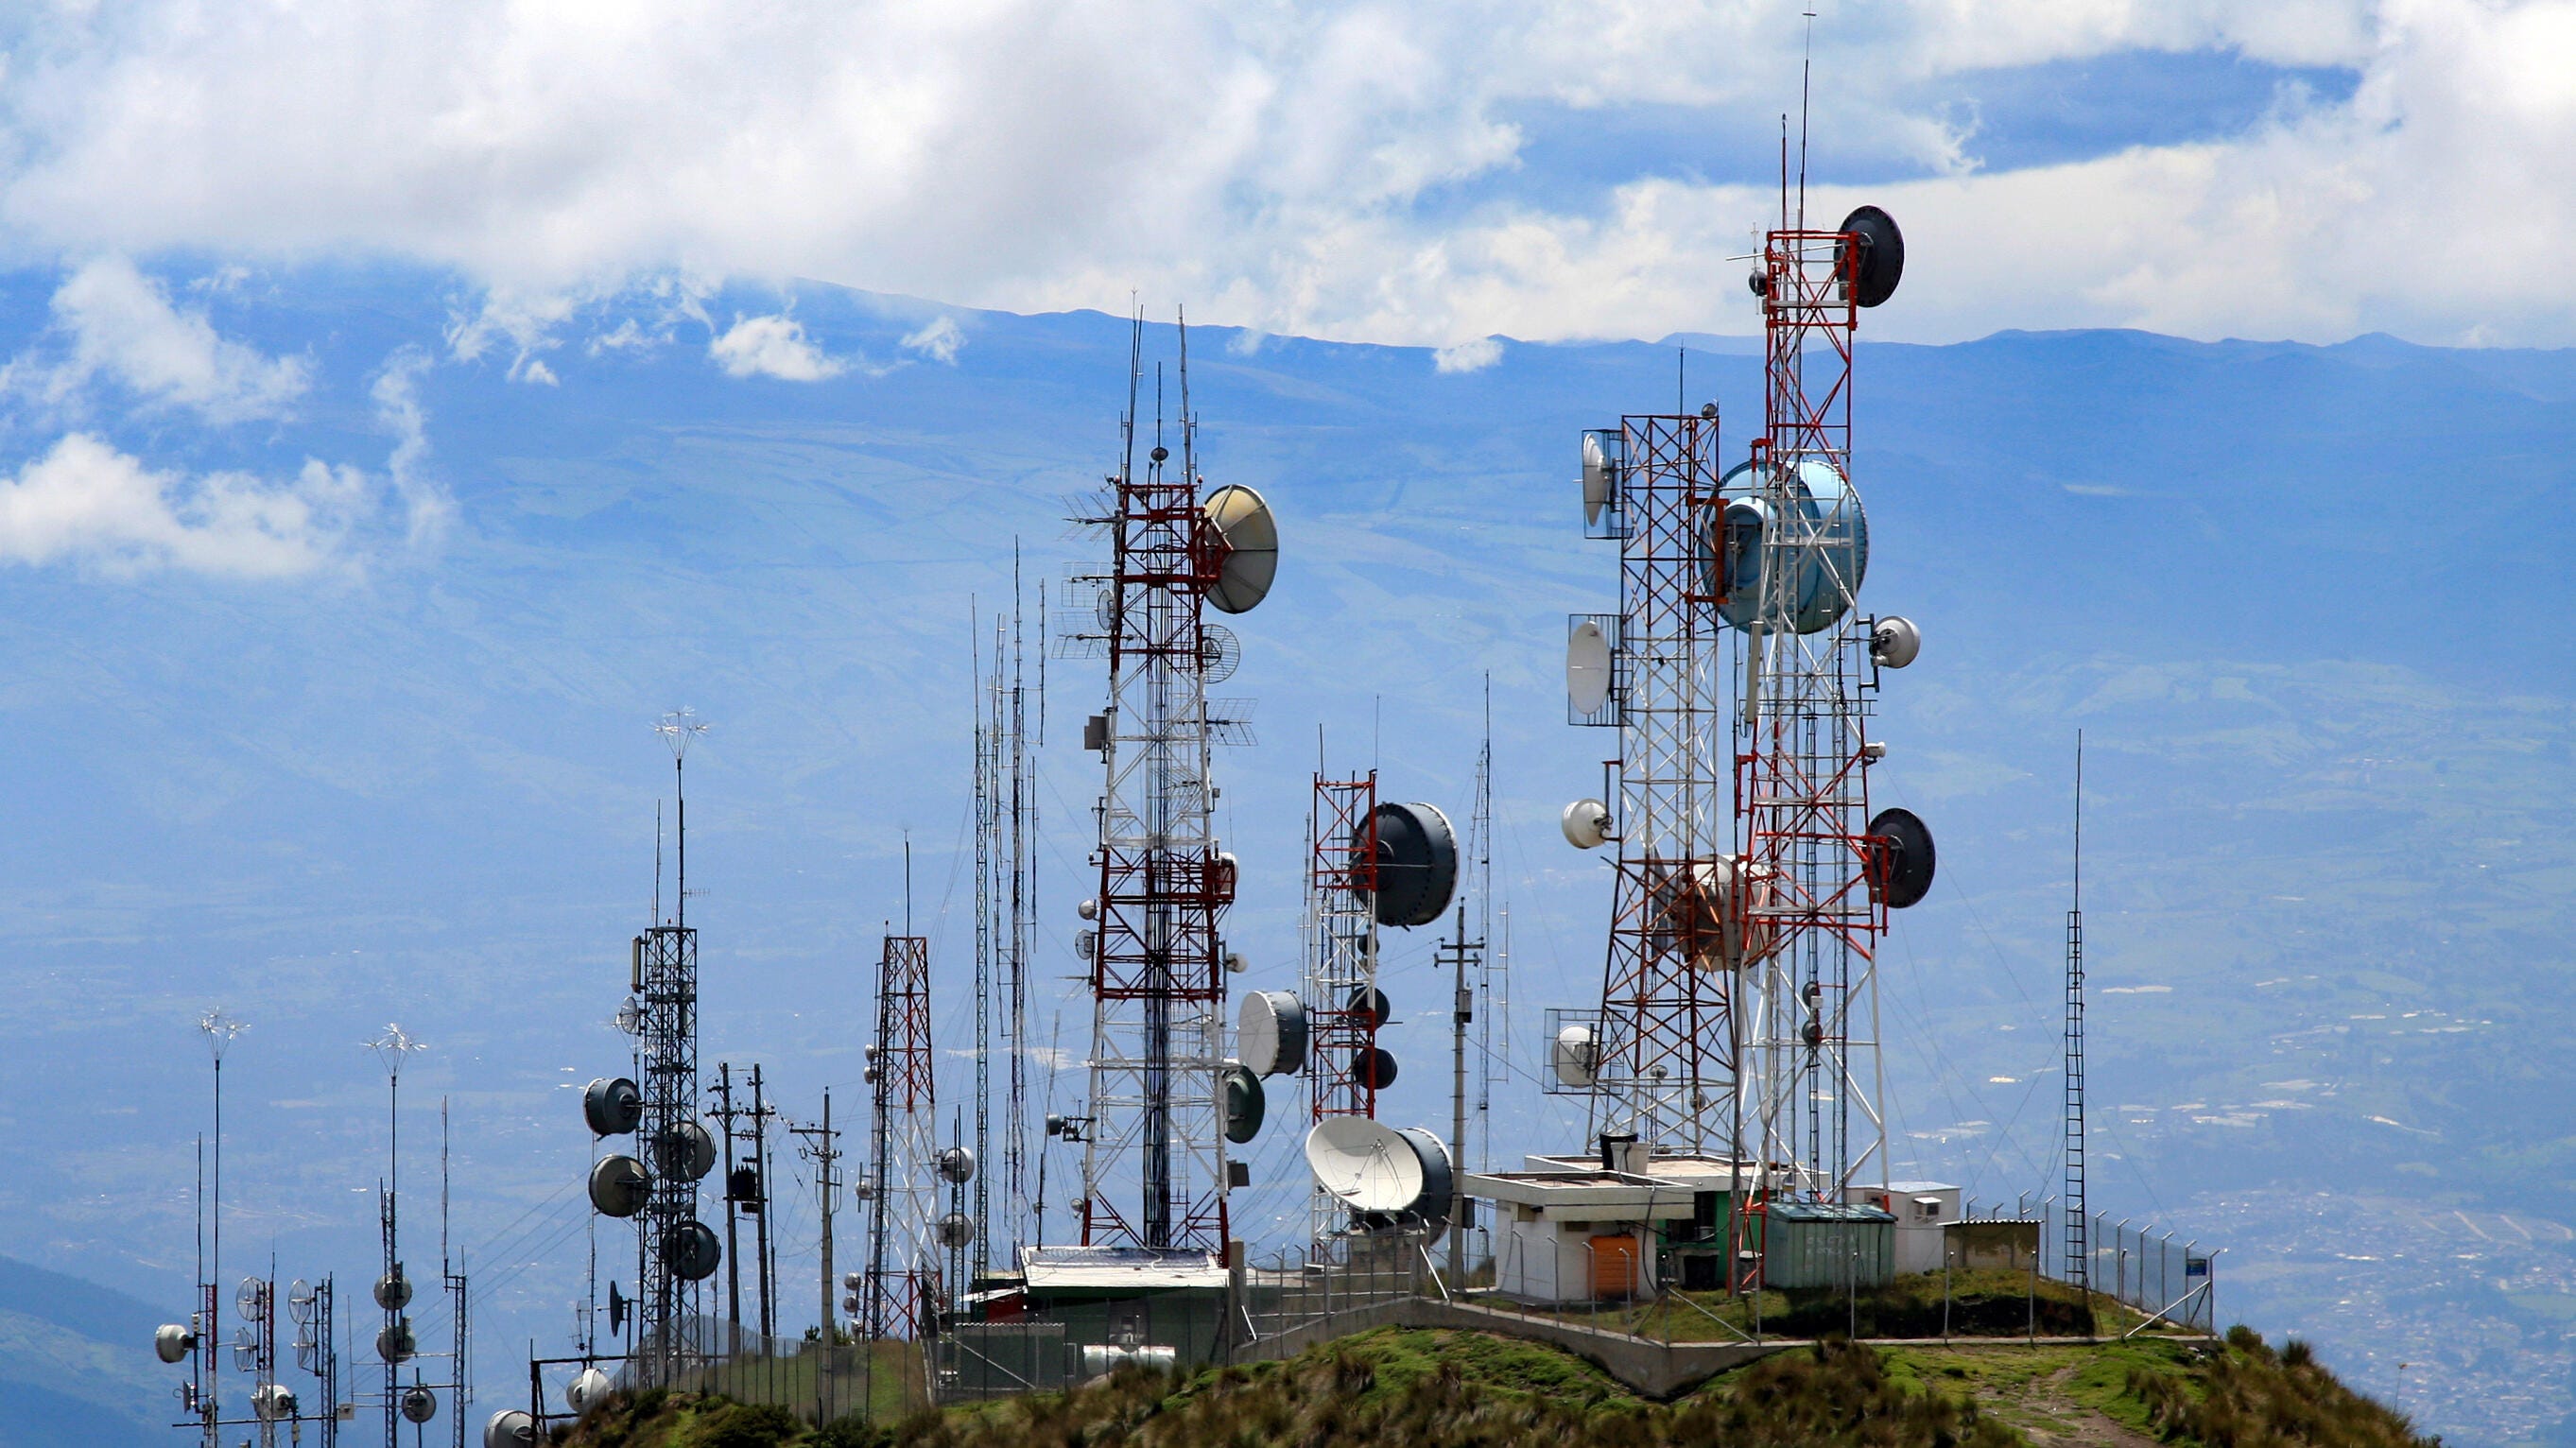 Tall towers with countless antennas sit on a mountaintop.  More mountains are in the distance.